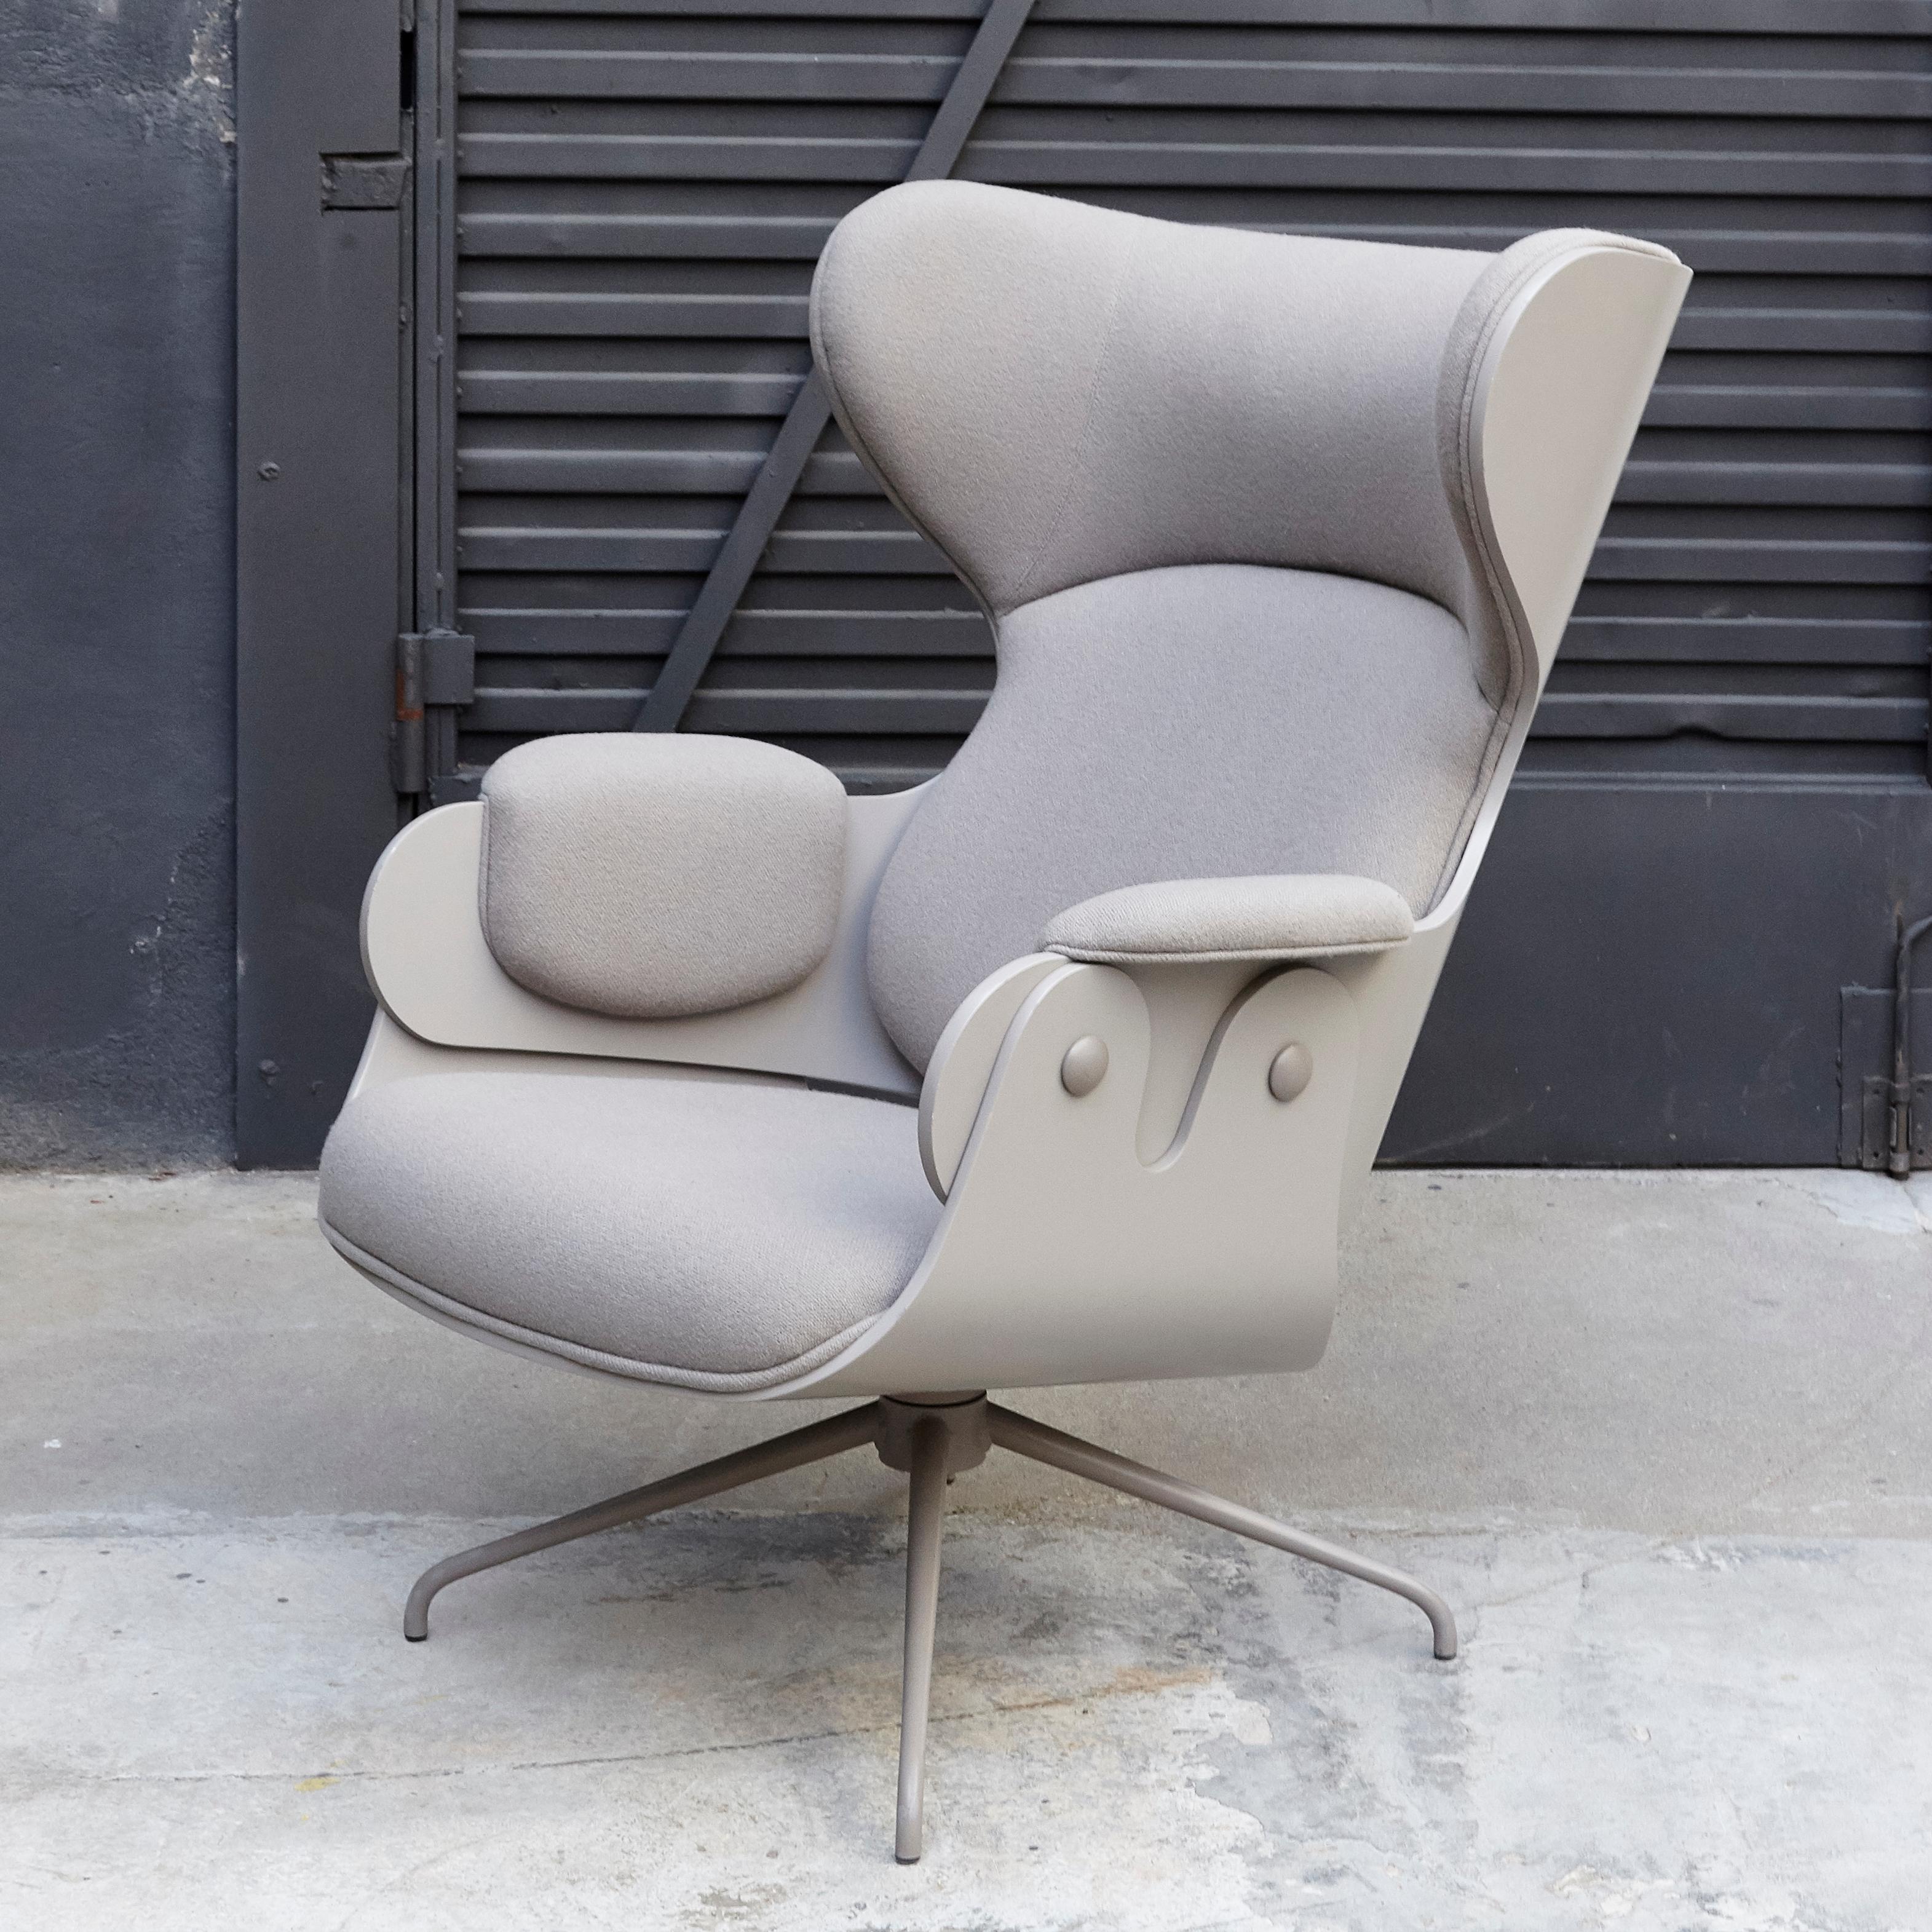 Jaime Hayon, Contemporary, Plywood Grey Upholstery Lounger Armchair 2